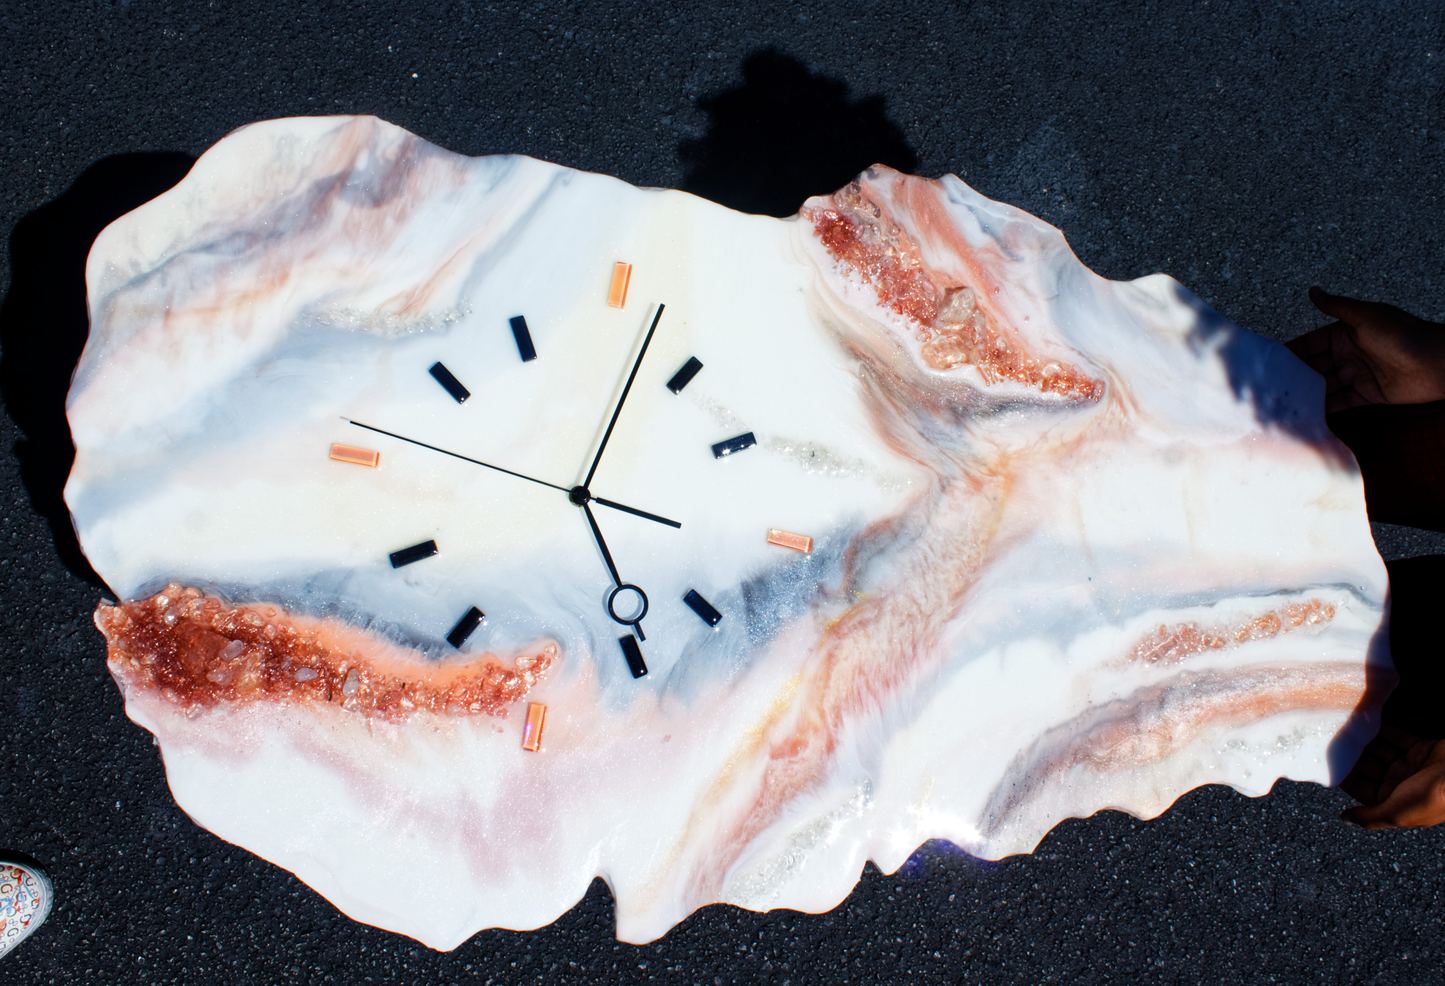 Coral Rose Pink Geode Wall Clock